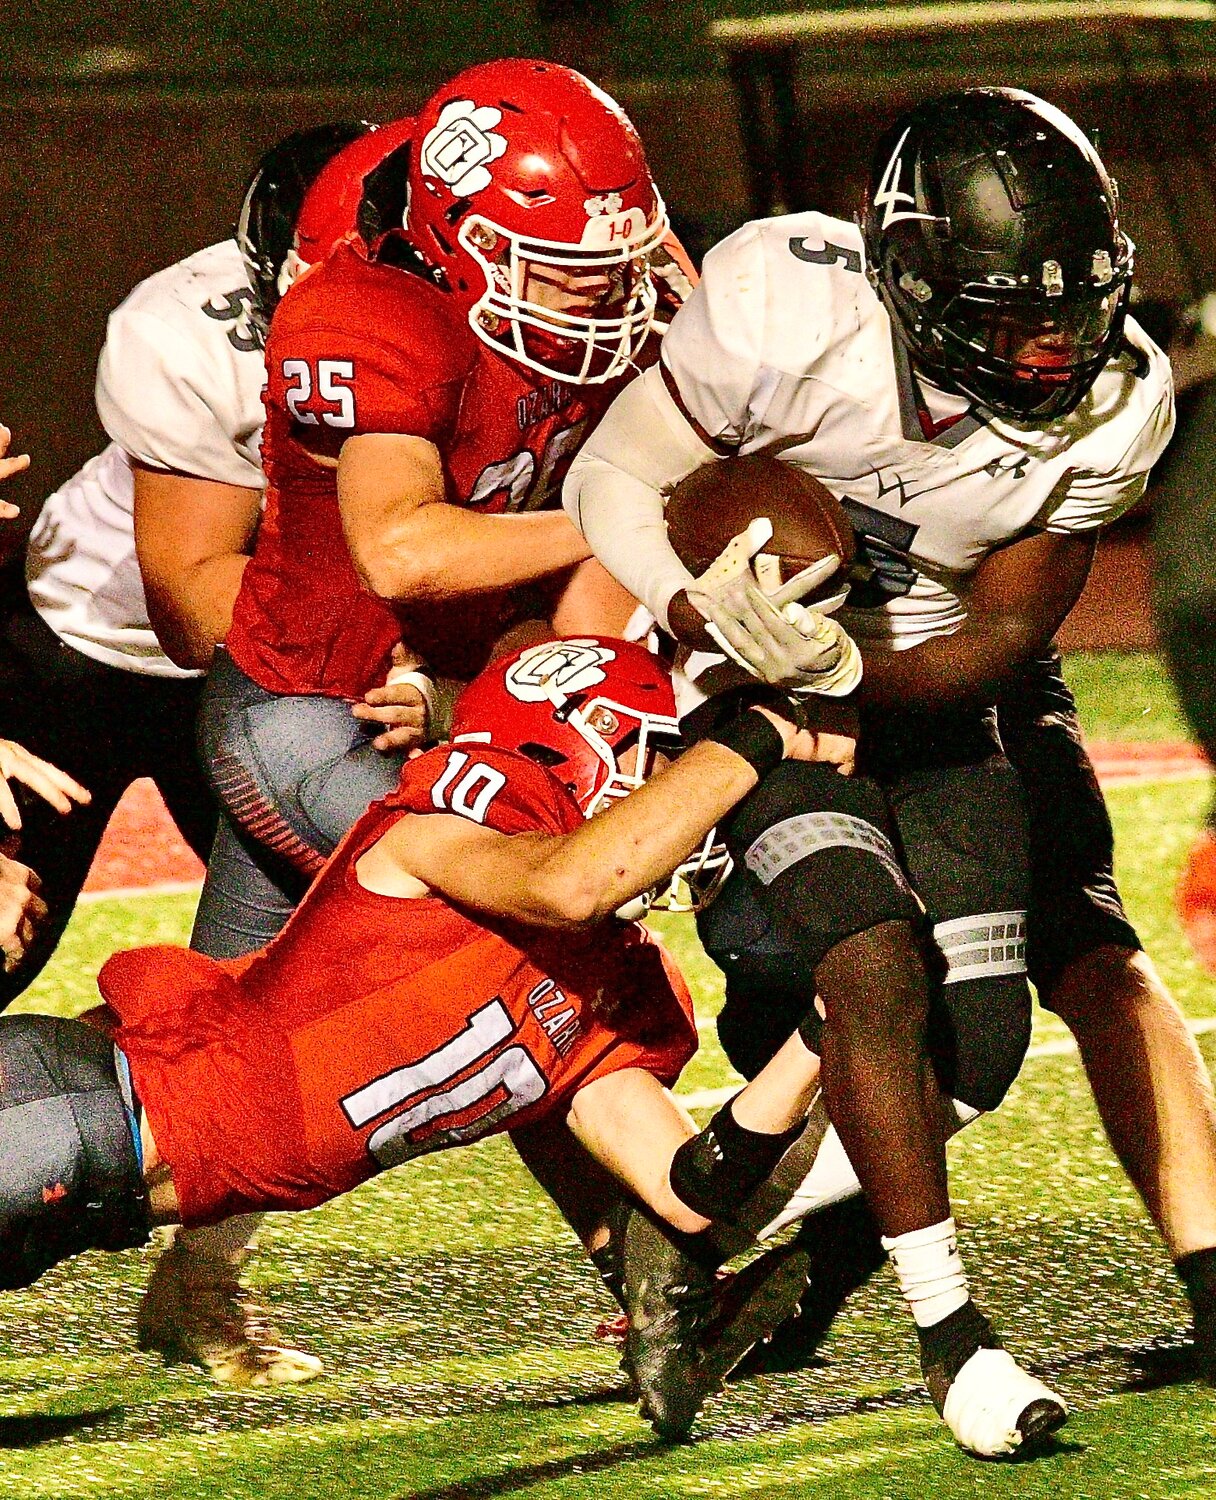 OZARK'S CHARLES LAWSON AND TAYGEN SCOTT records a tackle.